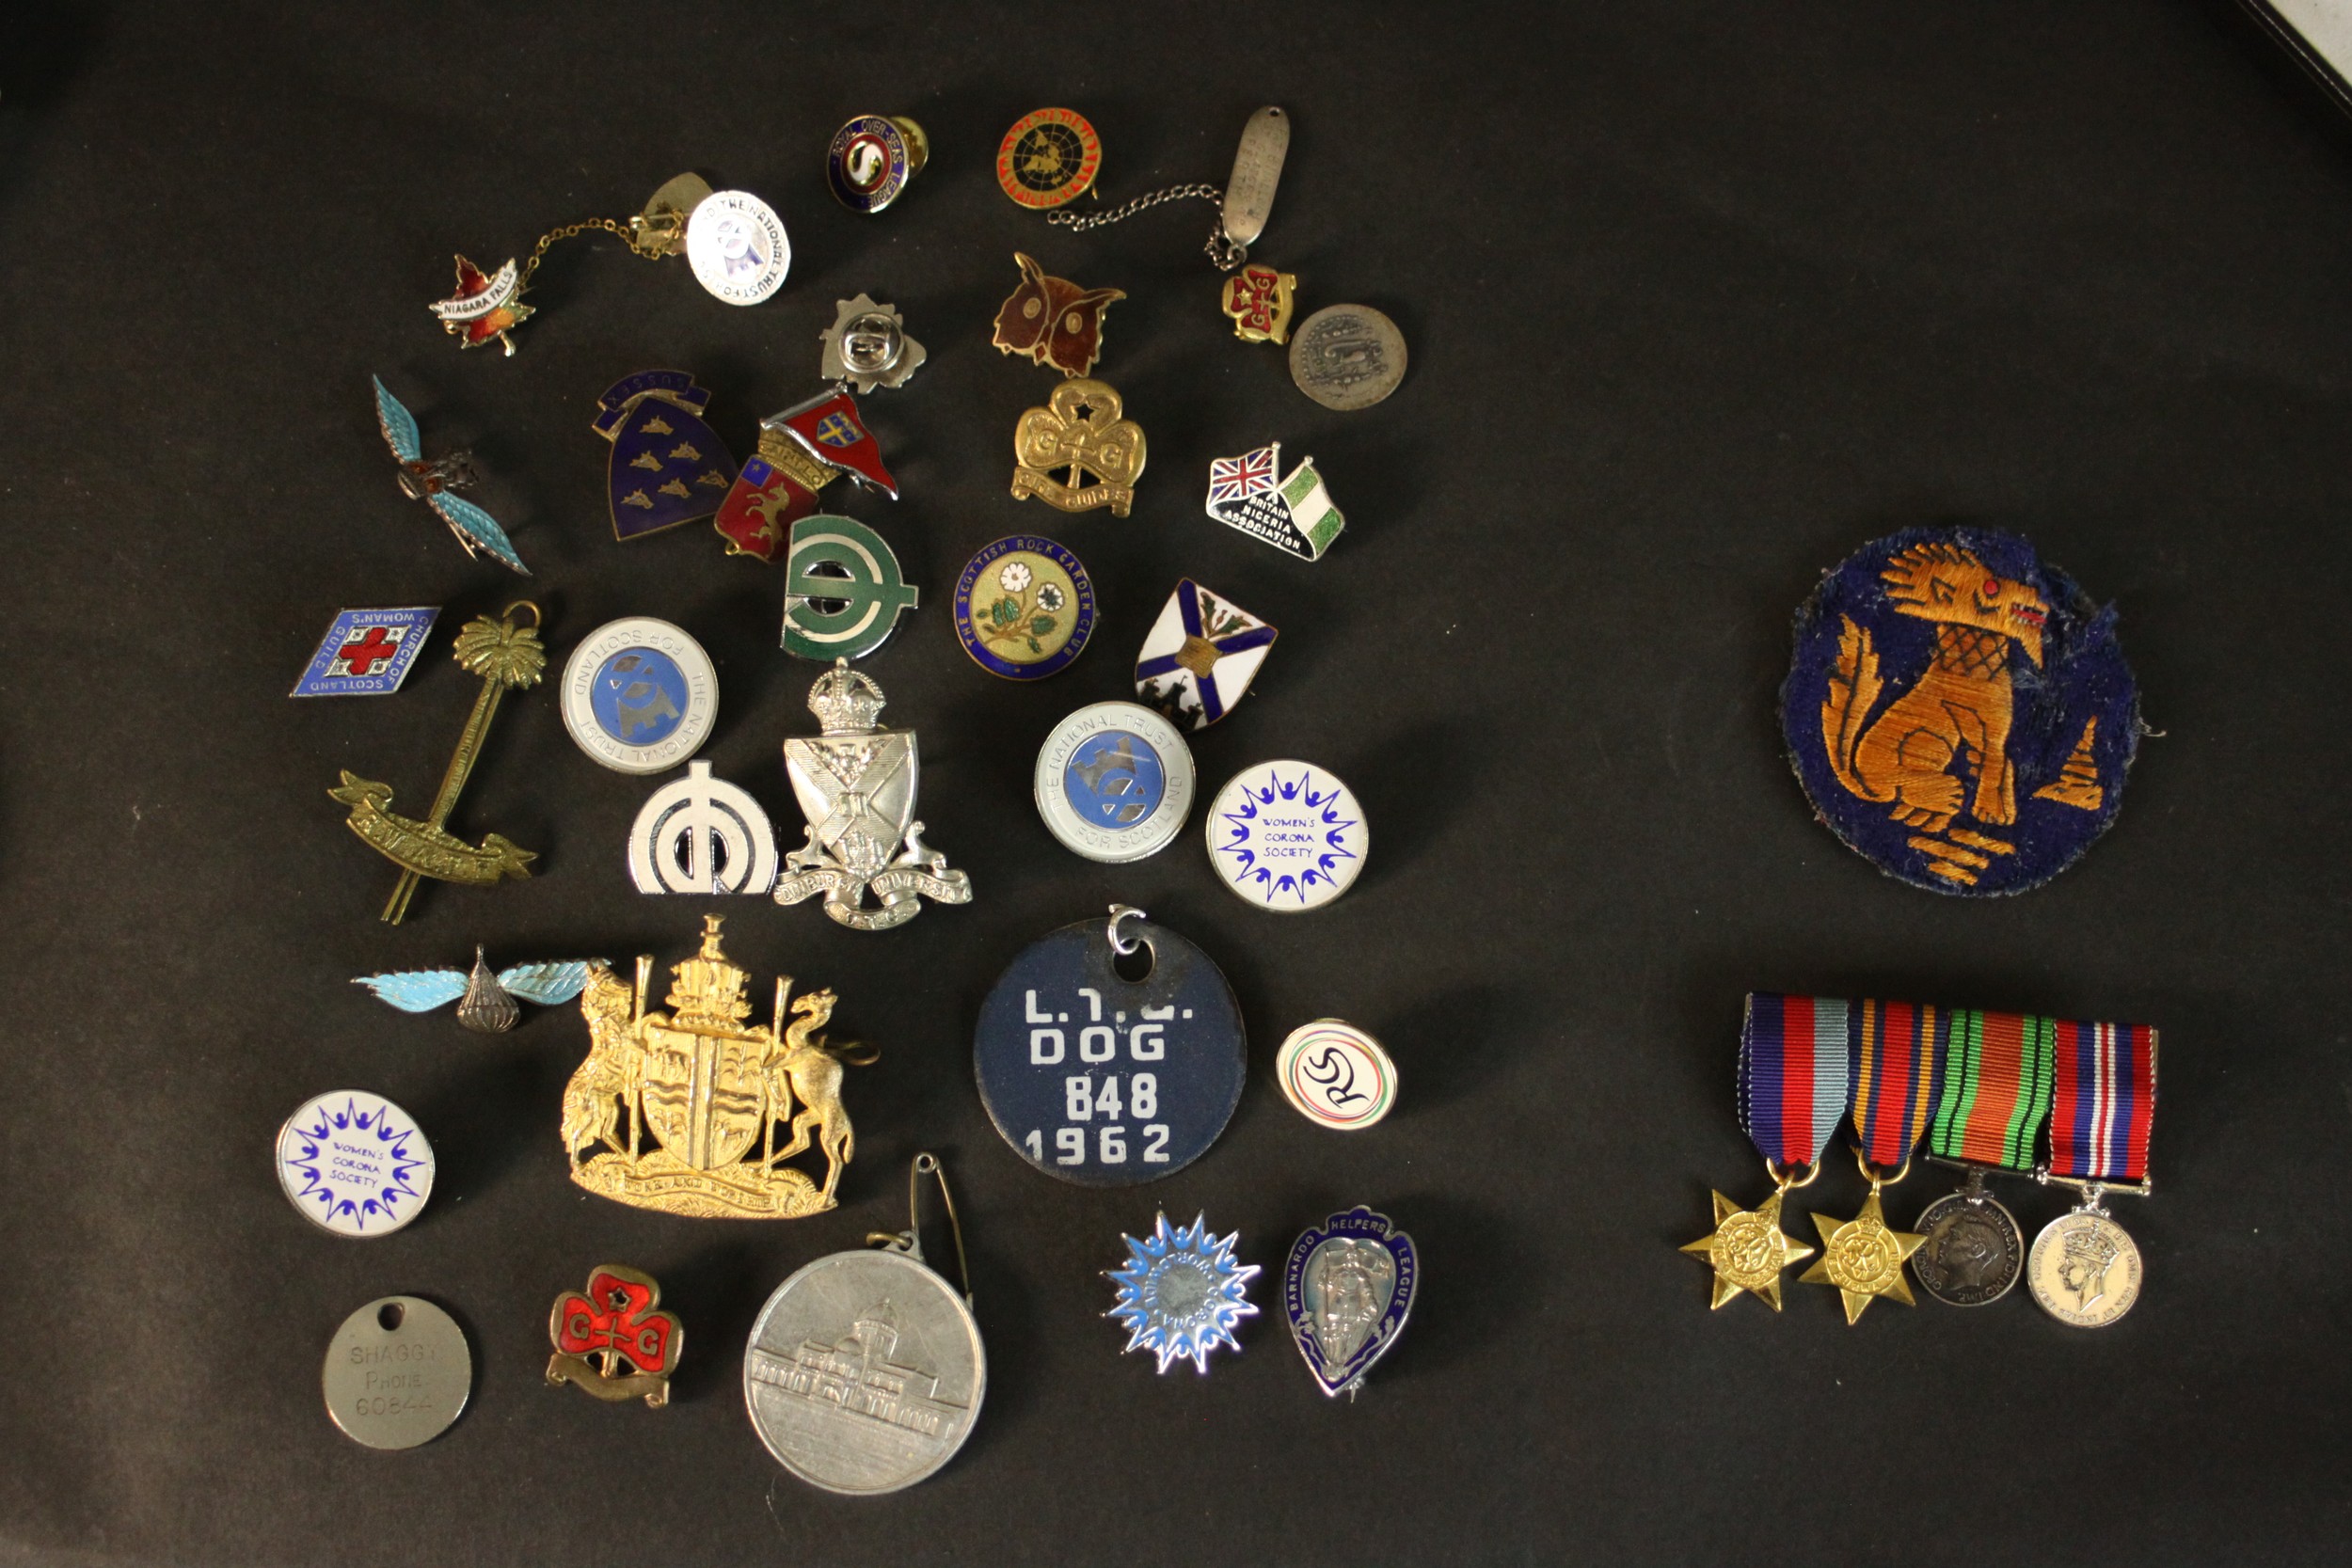 A large collection of various militaria medals and badges, including two silver and enamel